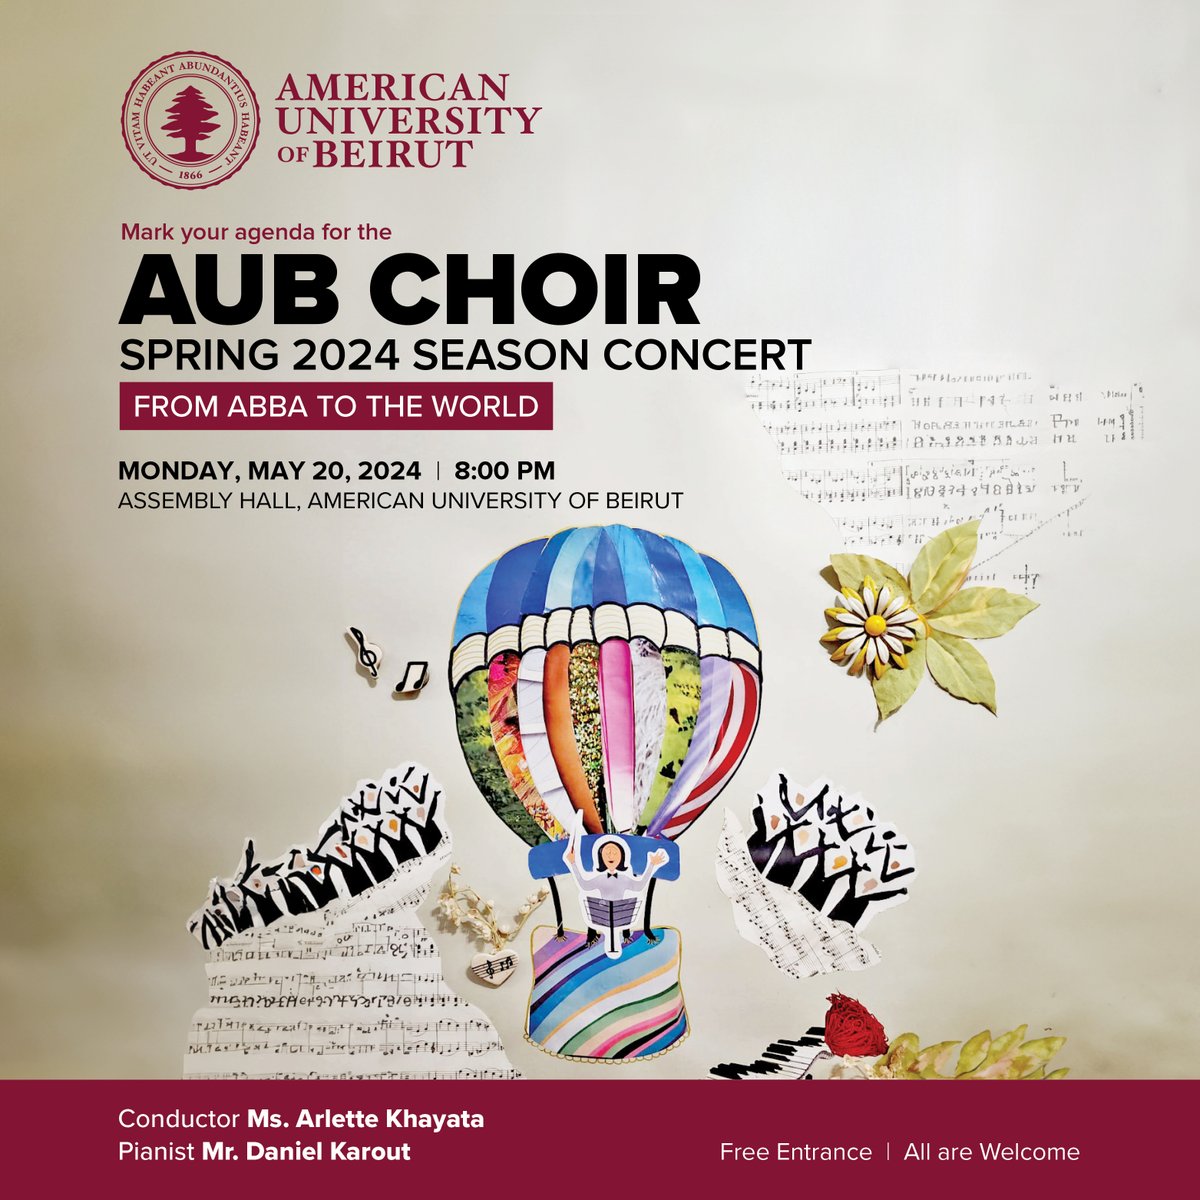 🎶 Mark Your Calendars! 🎶 Join us for the AUB Choir Spring 2024 Season Concert 🎵 📅 Monday, May 20, 2024 🕗 8:00 PM 📍 Assembly Hall, American University of Beirut Enjoy an unforgettable evening with Conductor Ms. Arlette Khayata and Pianist Mr. Daniel Karout. Free…